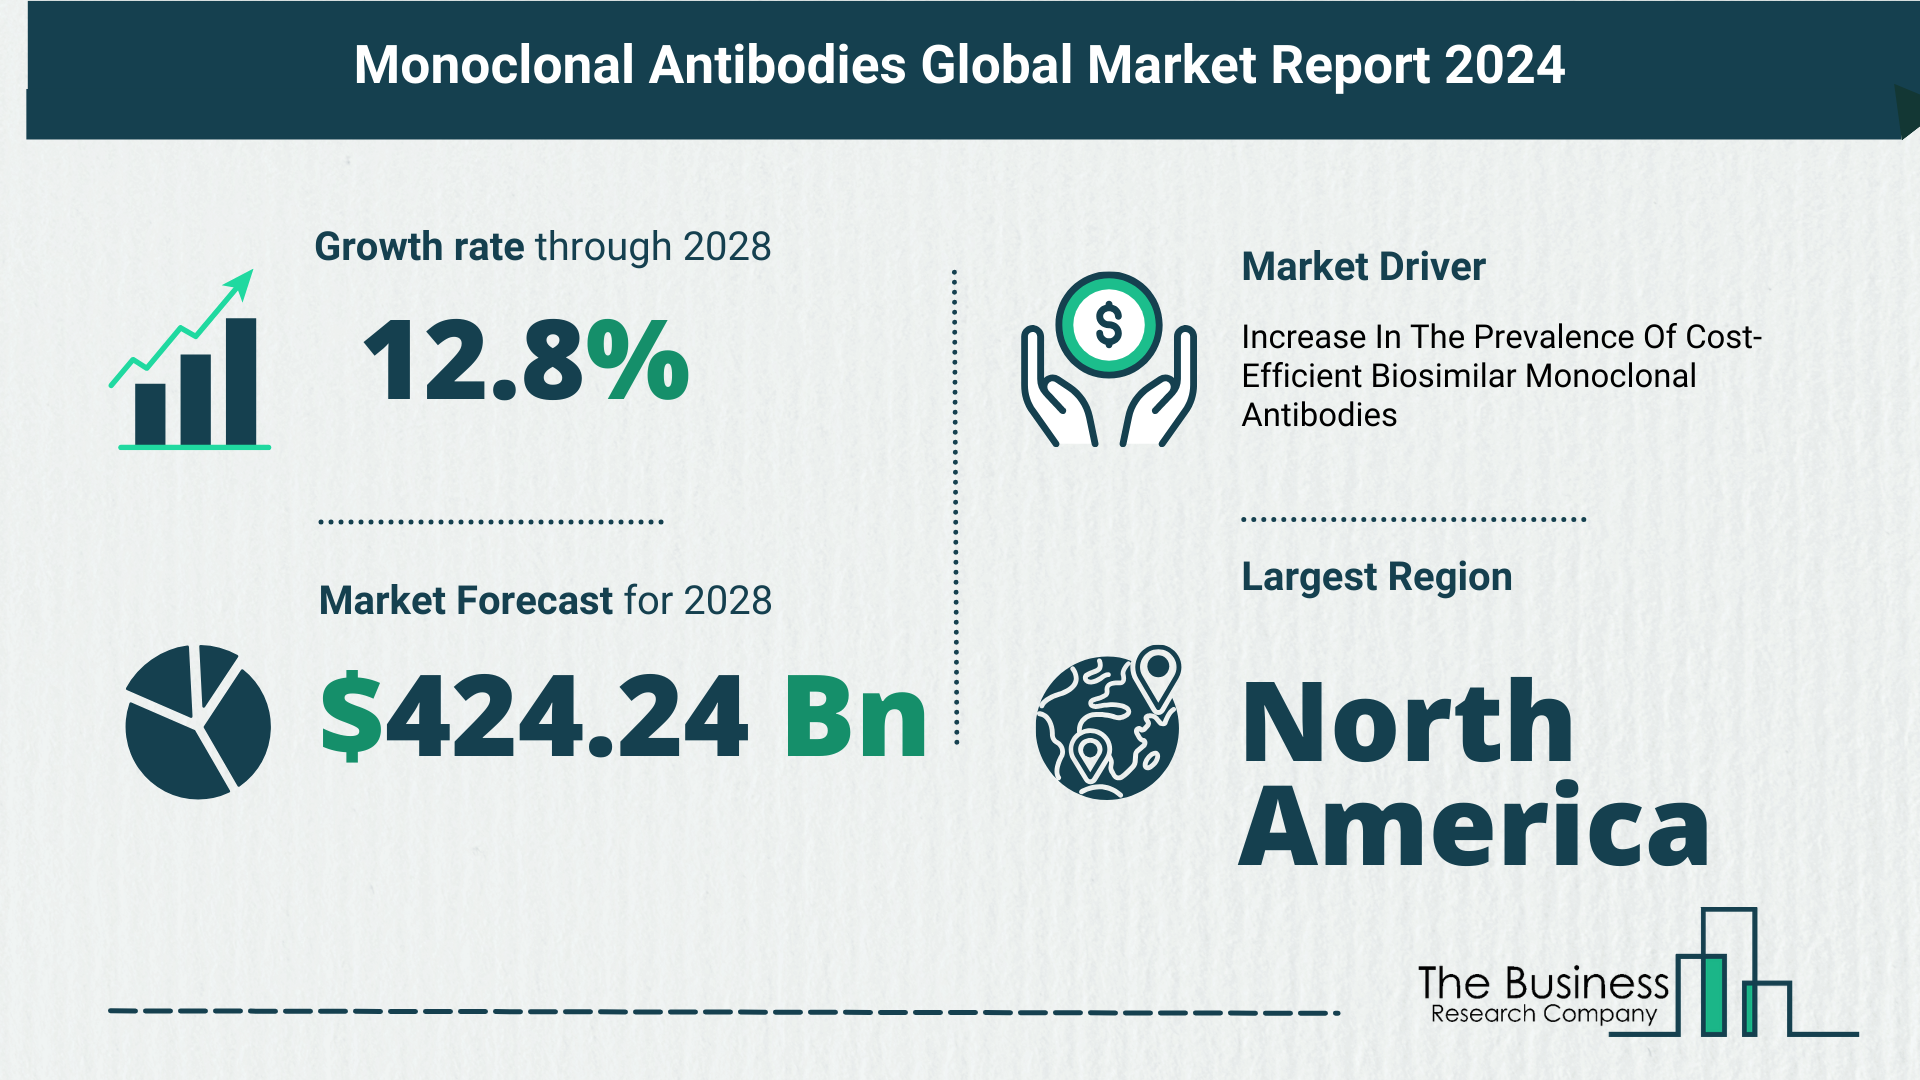 How Is The Monoclonal Antibodies (MAs) Market Expected To Grow Through 2024-2033